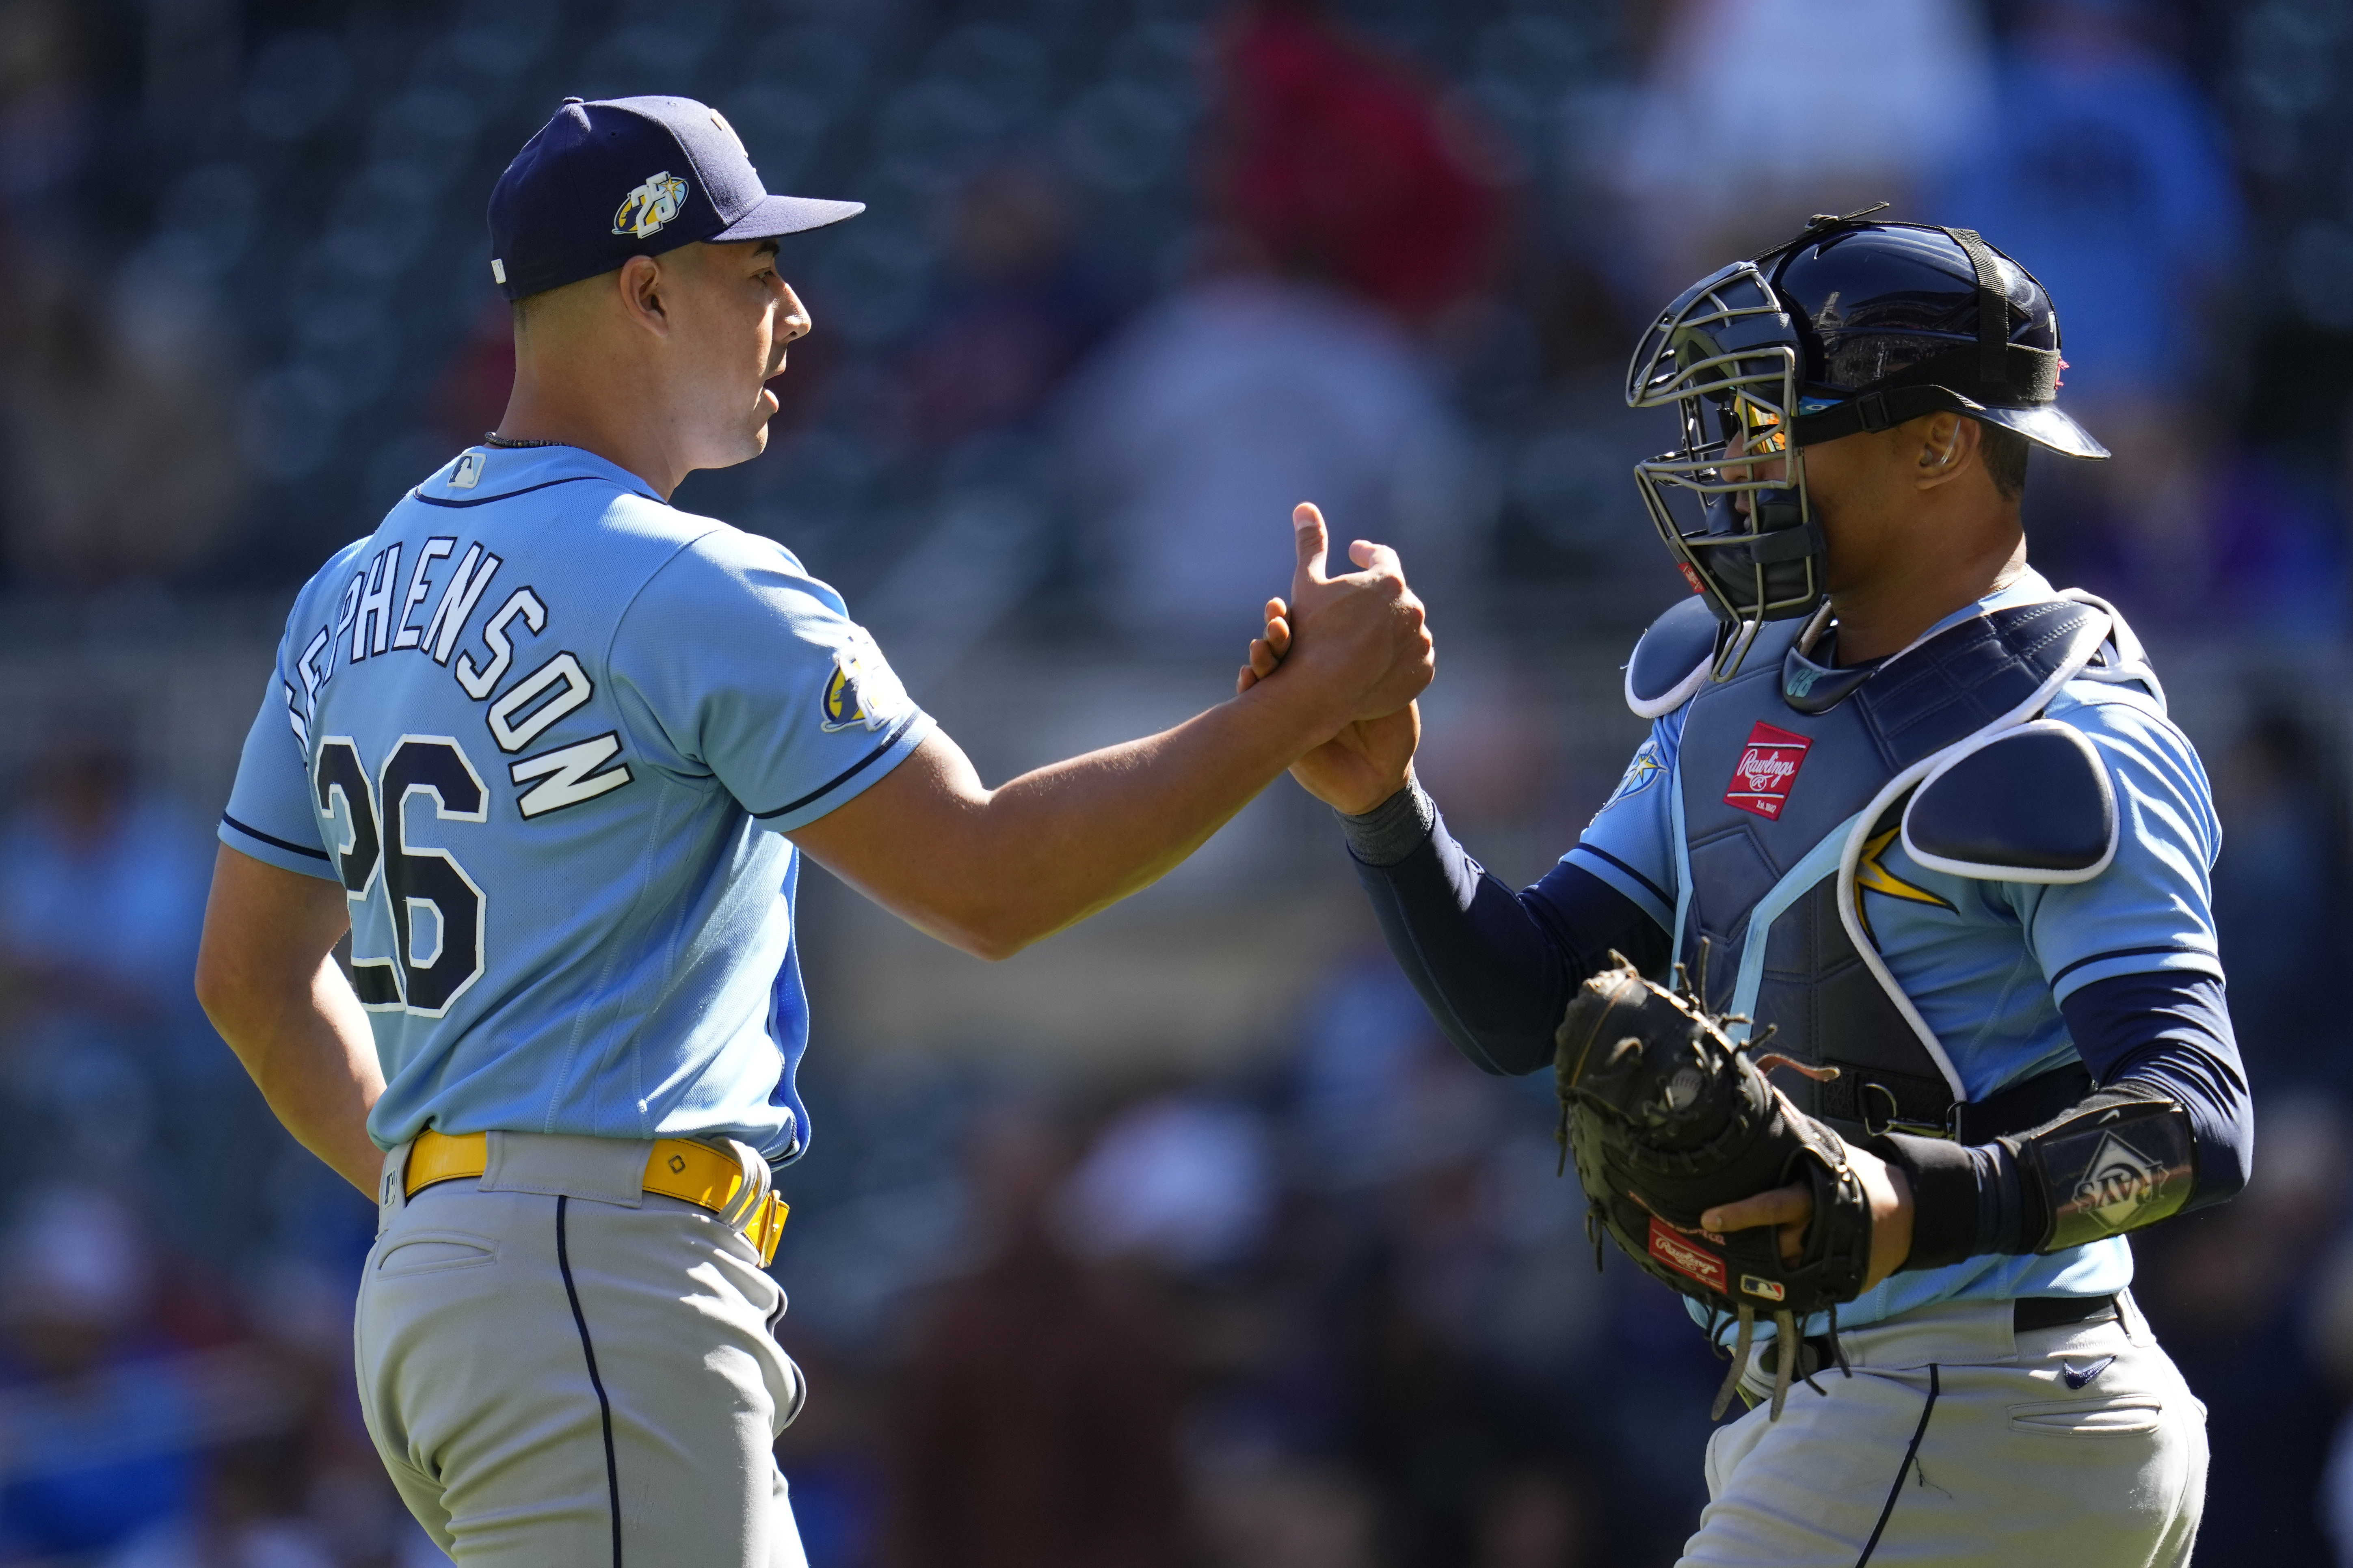 Rays, Rangers face off in AL Wild Card Series after looking at